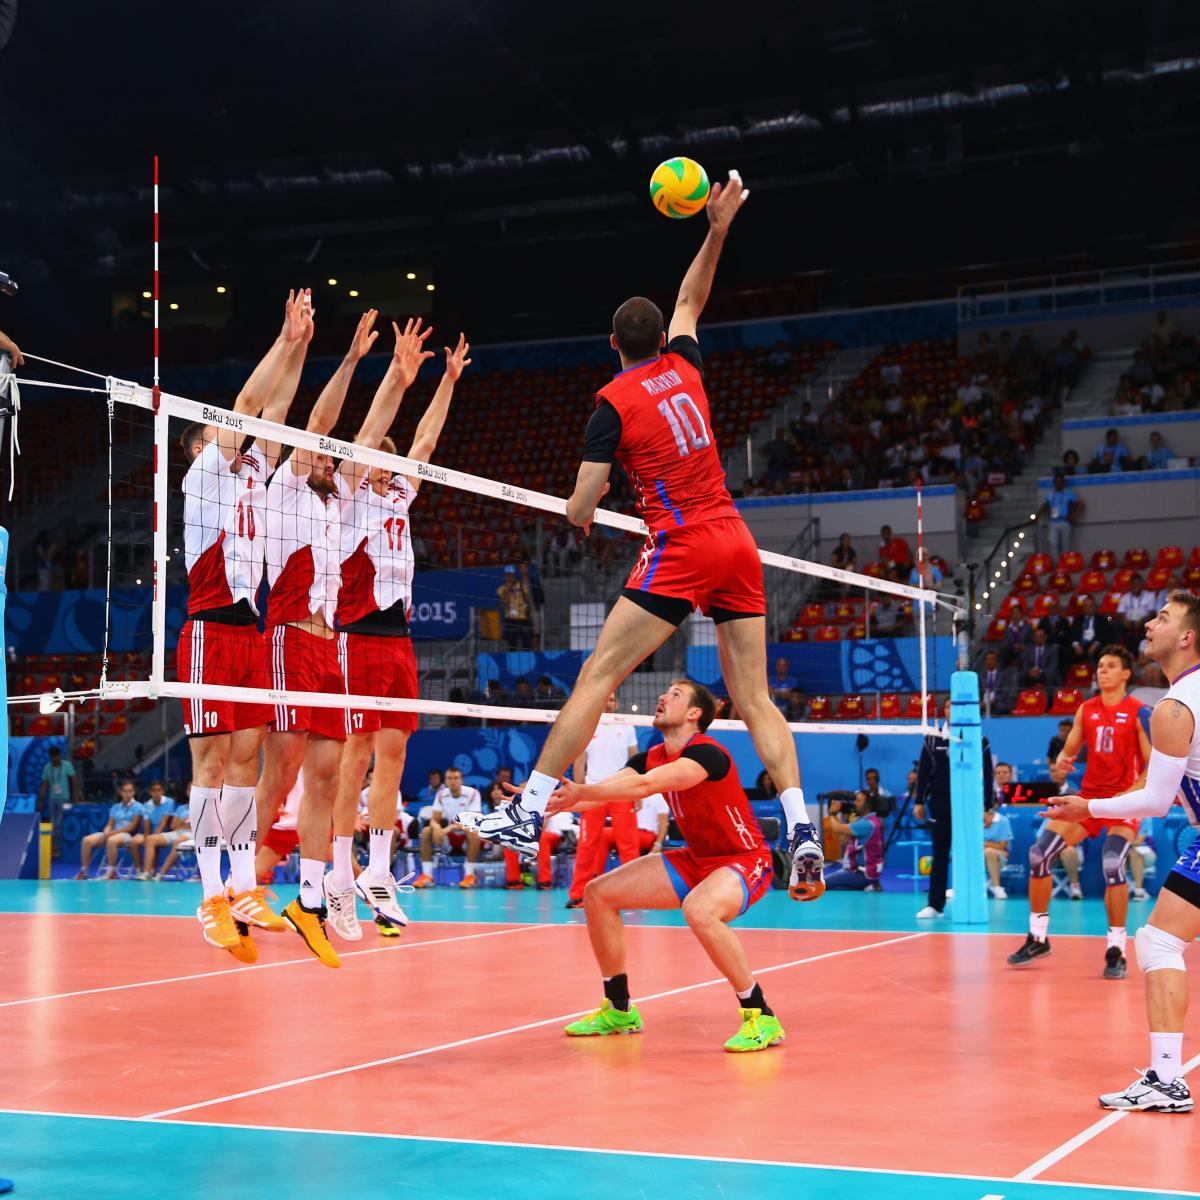 Men's Volleyball World Cup 2015 Dates, Schedule and Teams Bleacher